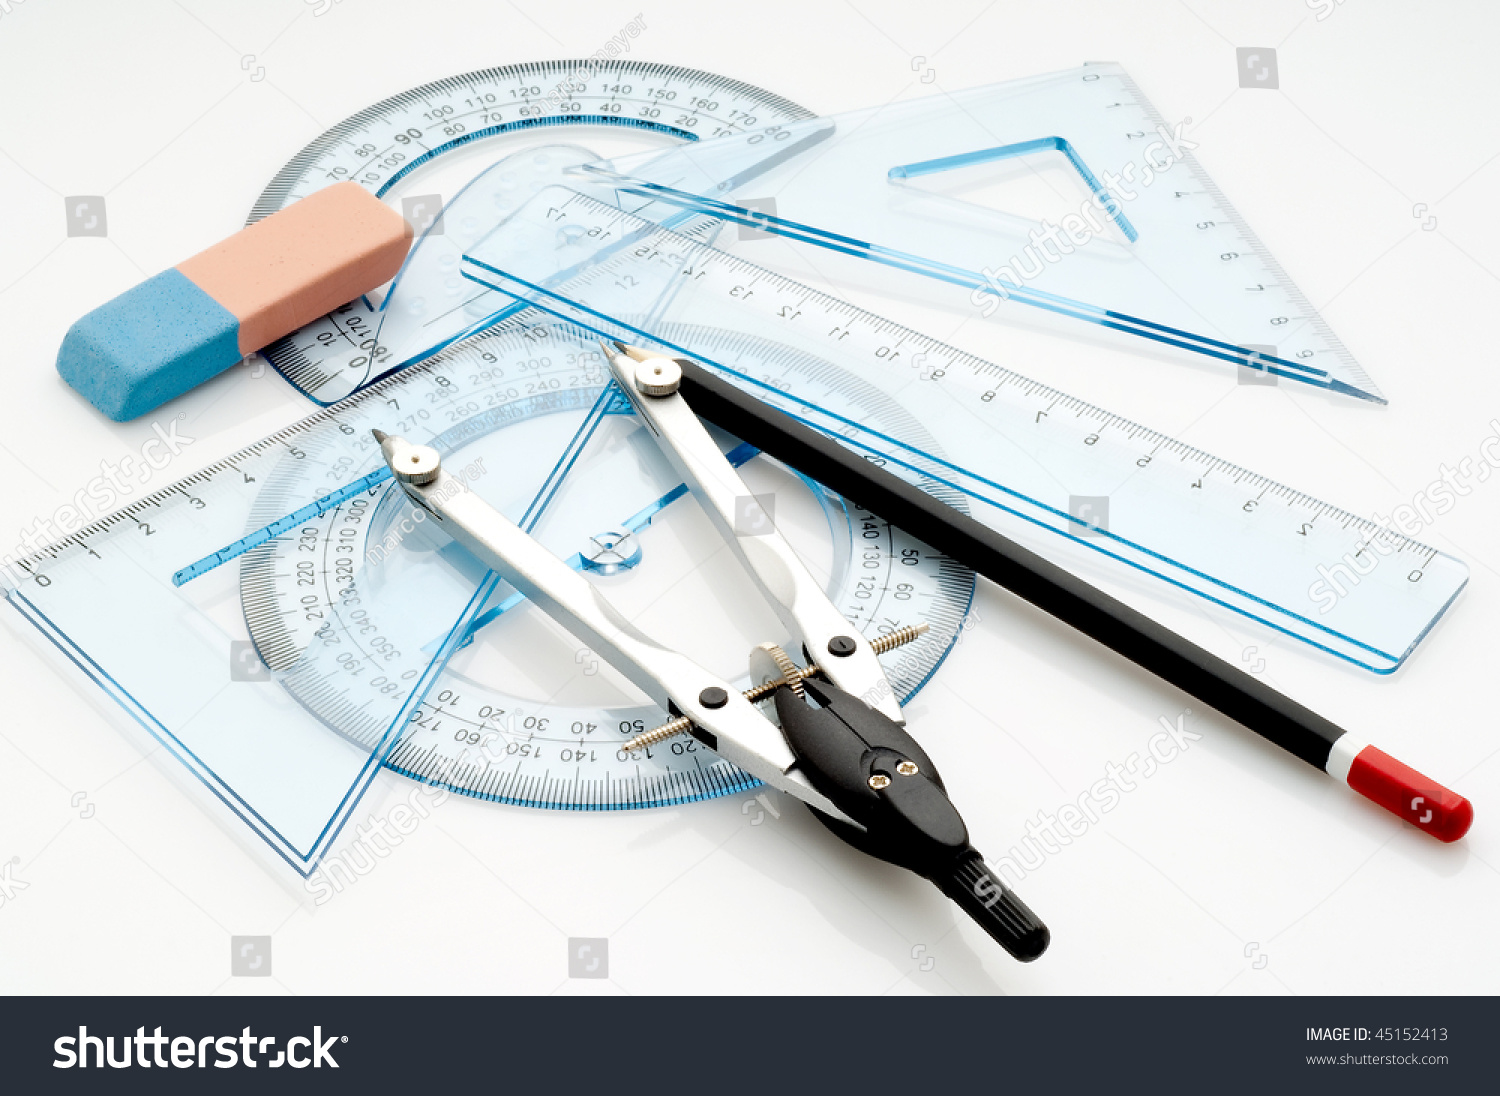 Technical Drawing Instruments Stock Photo 45152413 Shutterstock